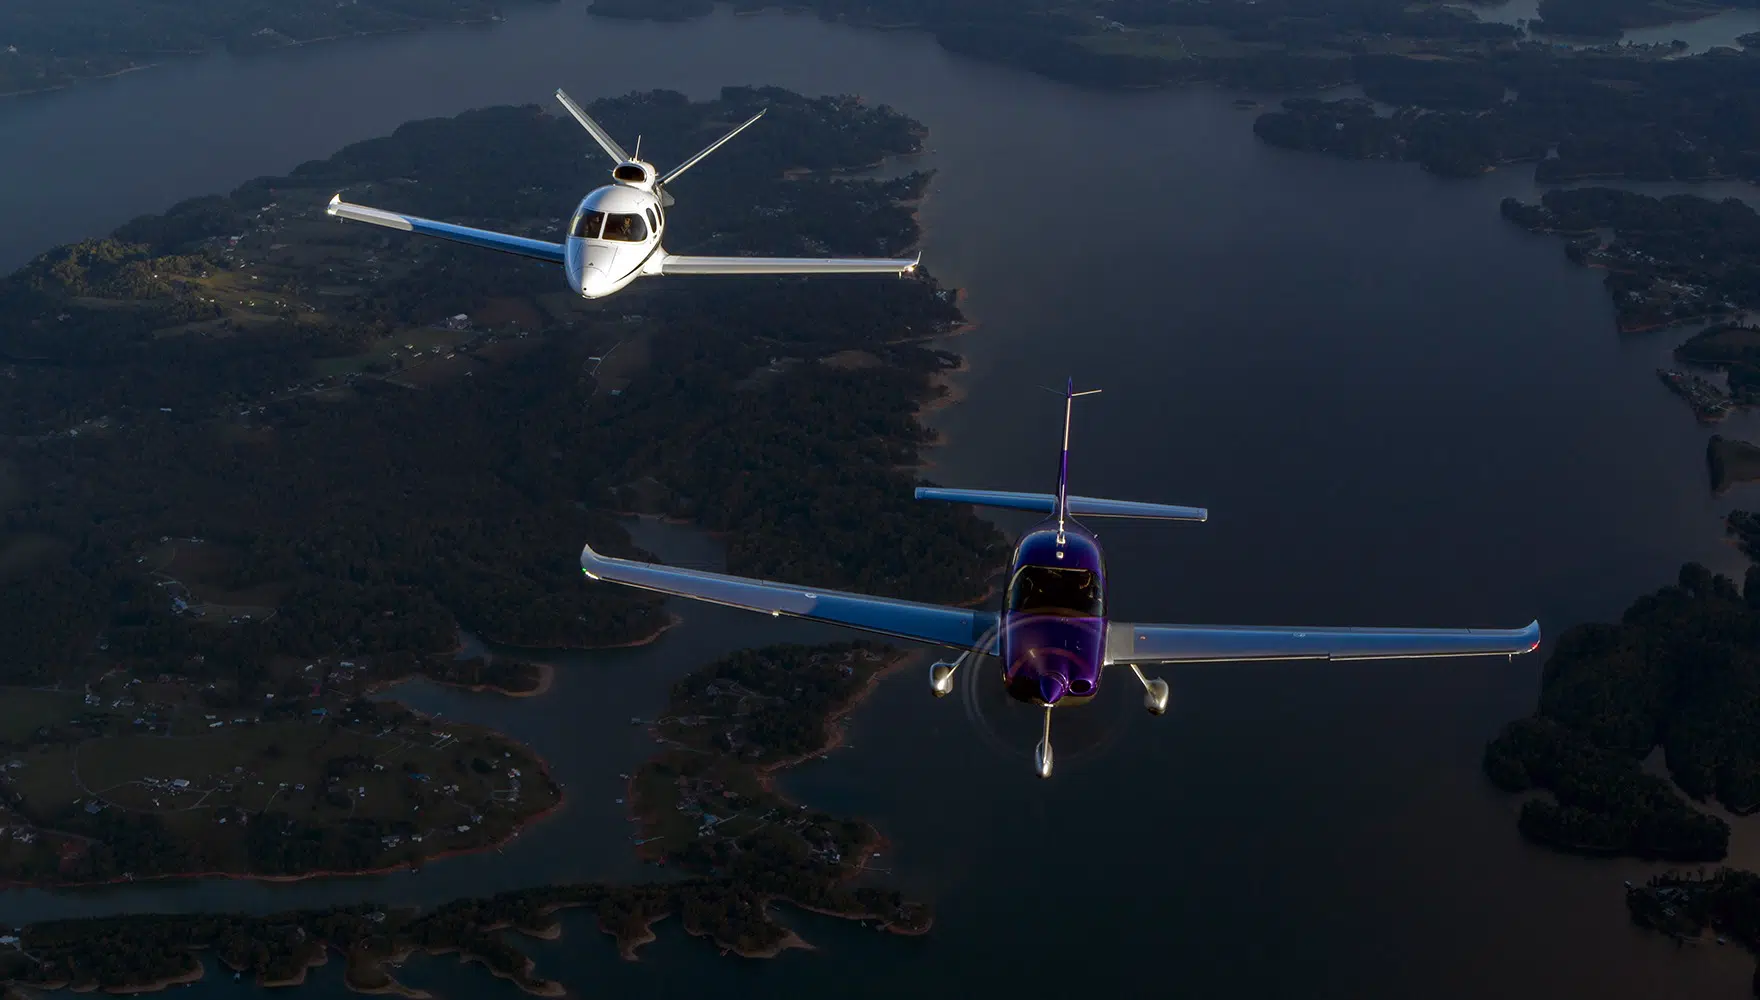 Cirrus Aircraft Delivers Strong 2020 Performance – Holding Top Positions in High-Performance Piston and Jet Aircraft Markets